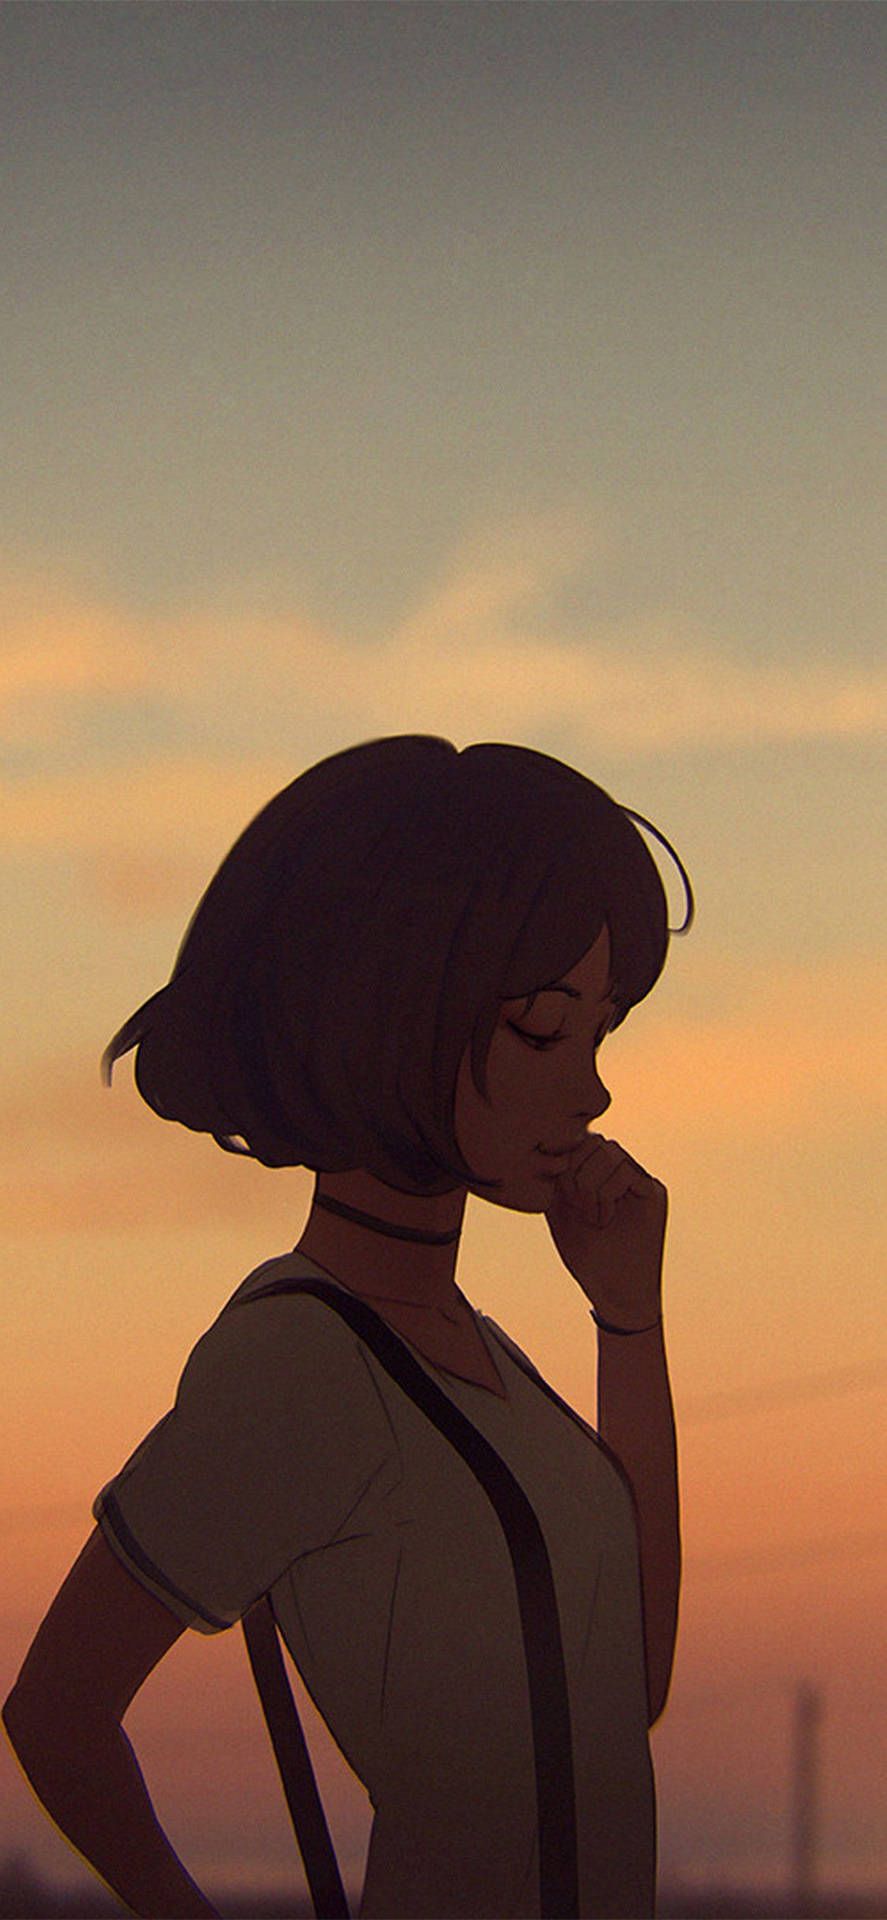 A woman in a hat stands in front of a sunset. - Anime girl